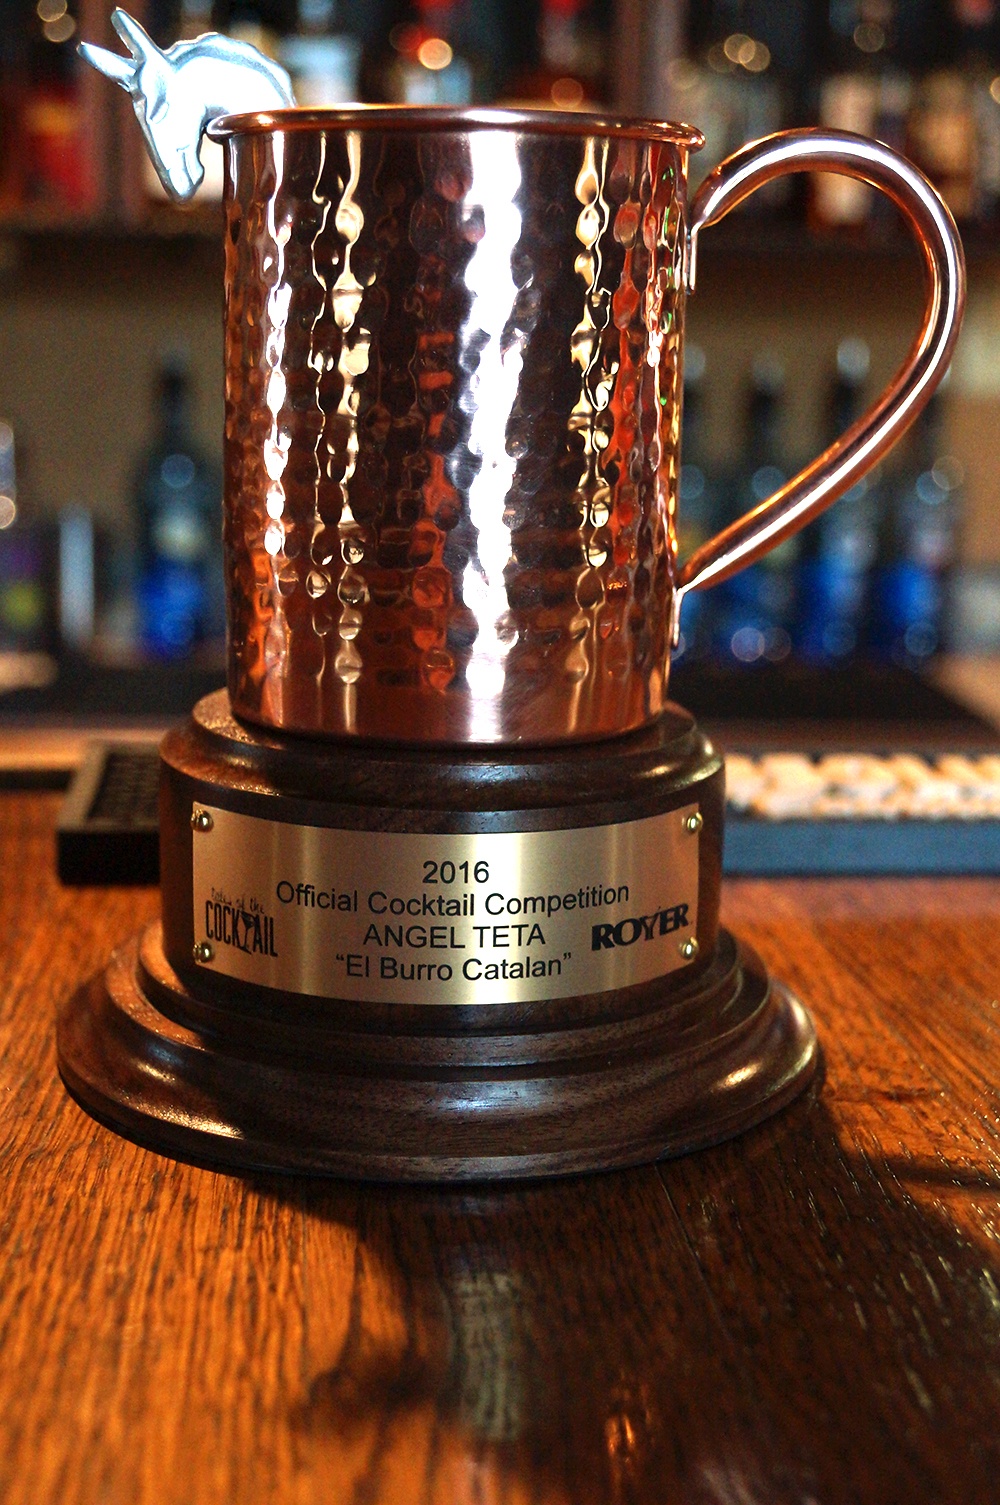 Moscow_Mule_Trophy_With_Swizzle_Stick.jpg